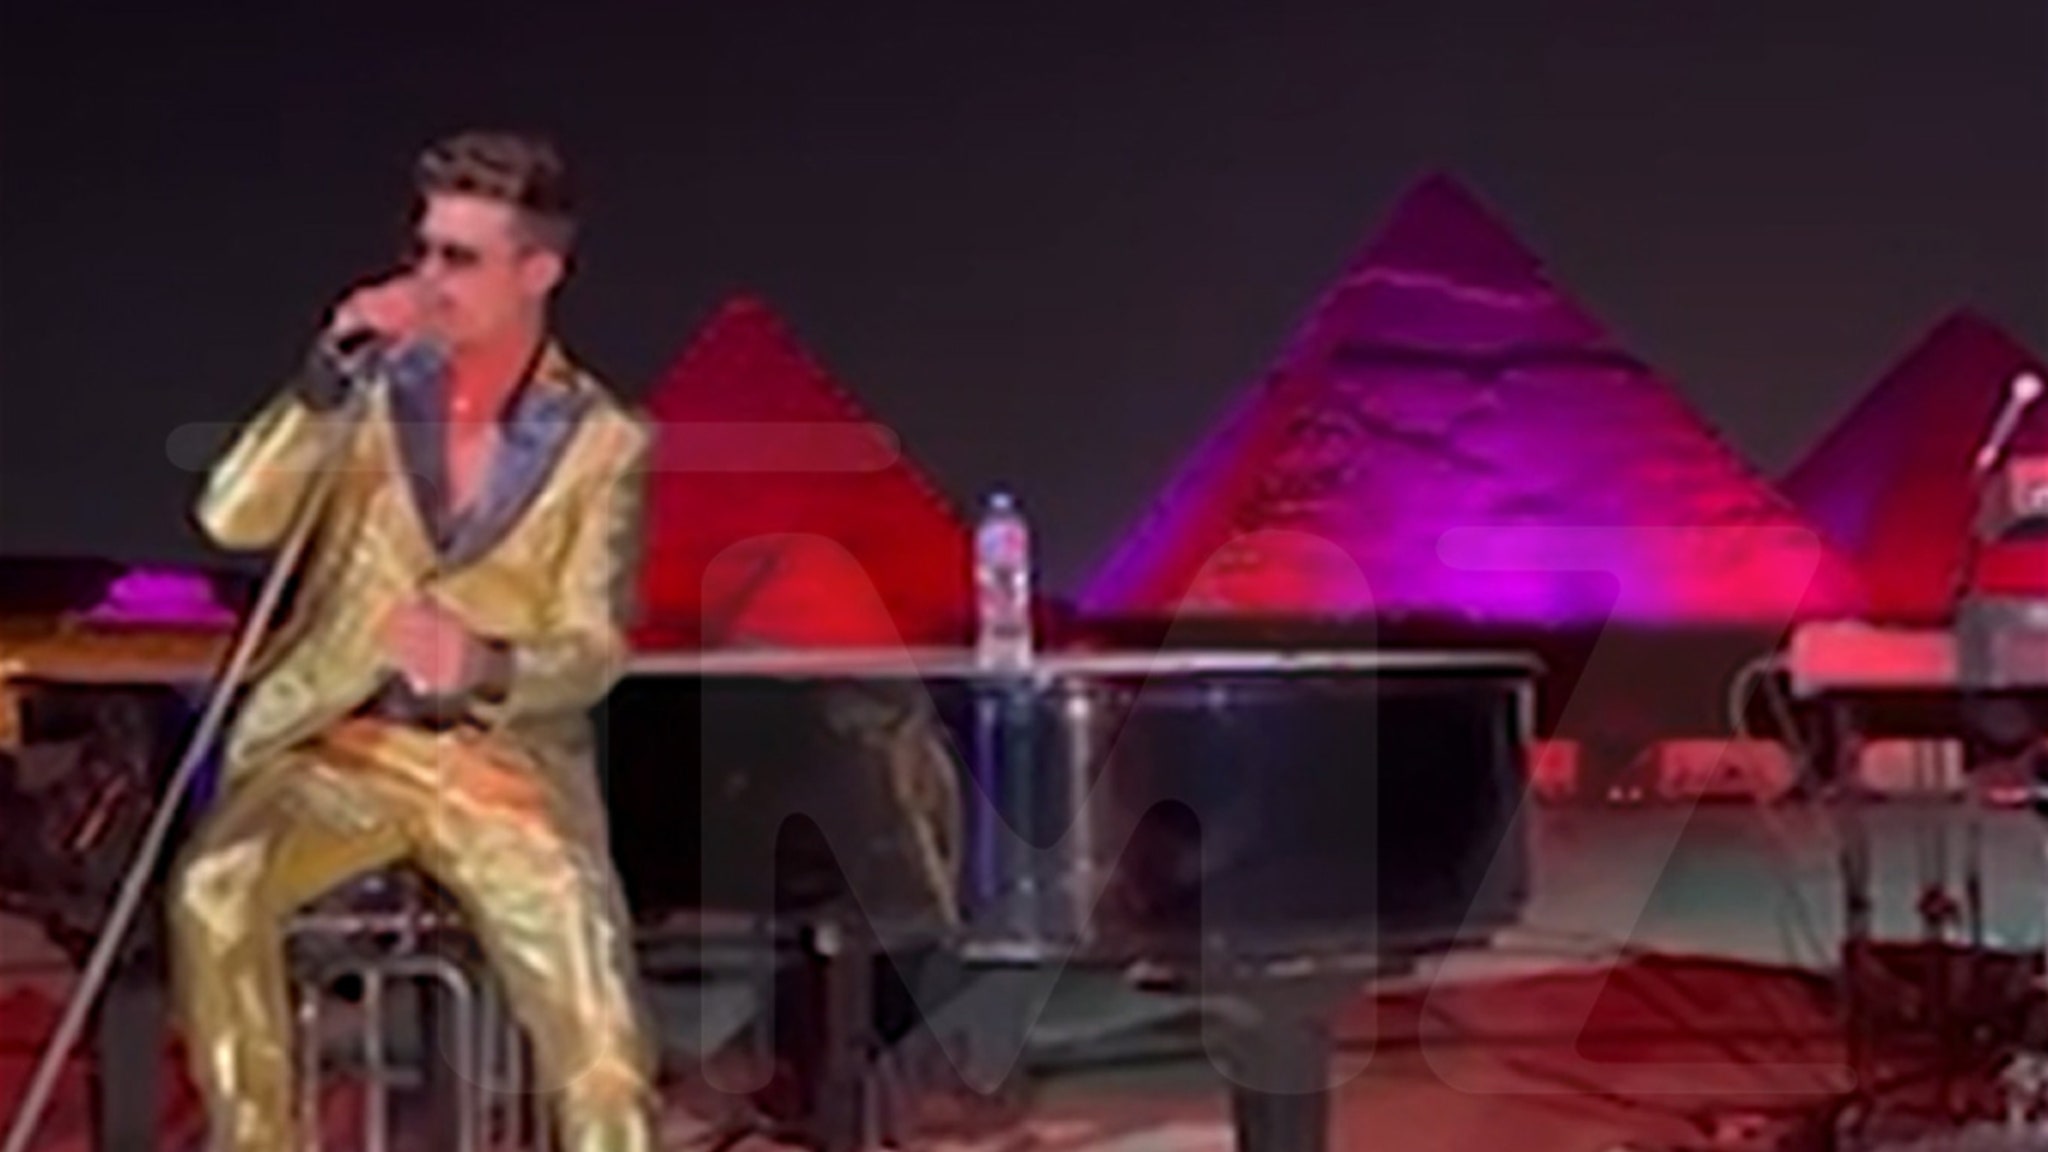 robin-thicke-performs-for-lavish-wedding-at-base-of-pyramids-in-egypt